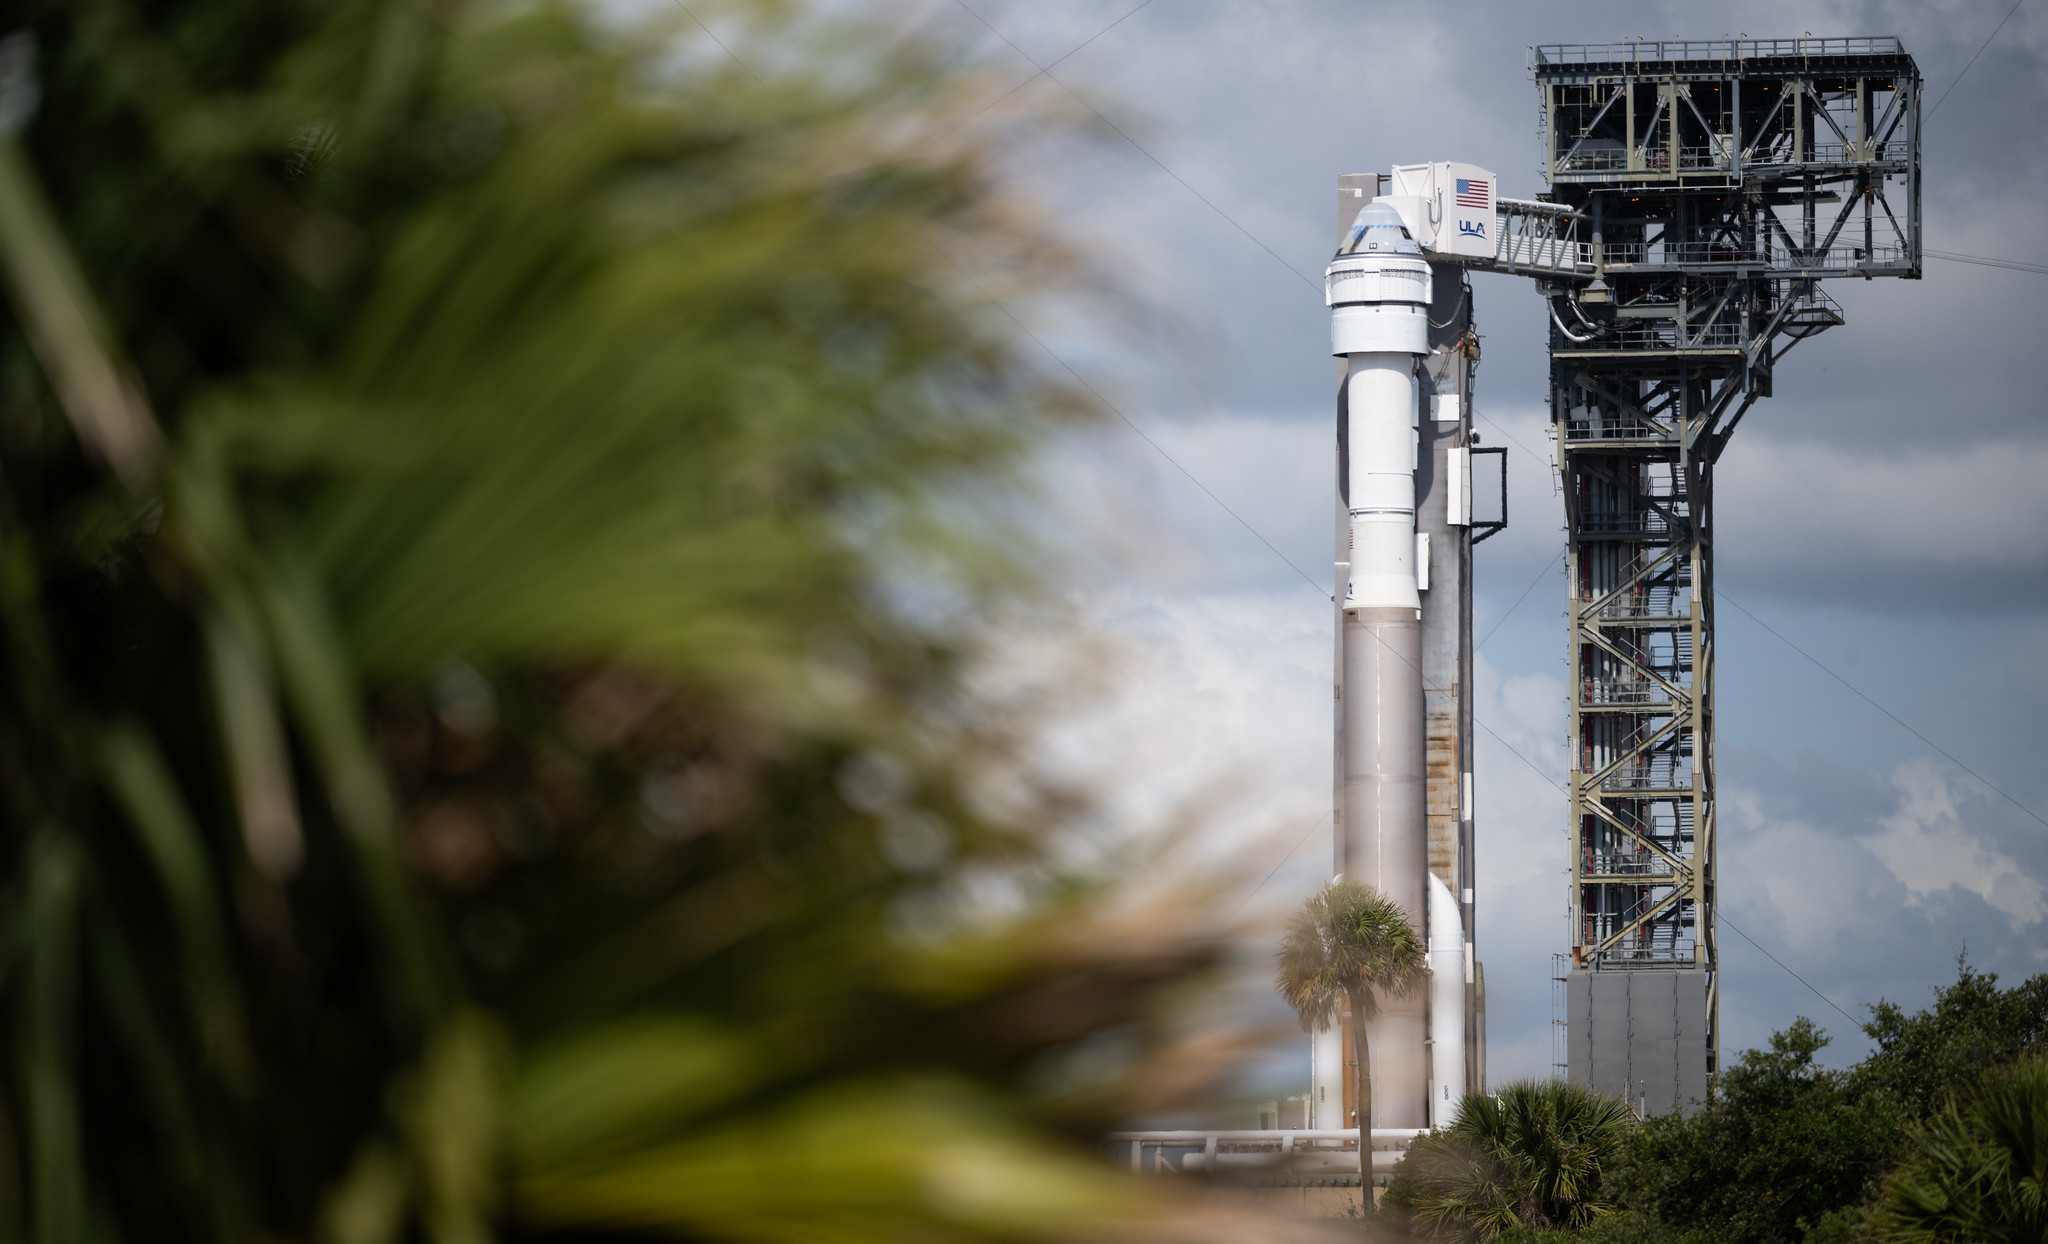 A United Launch Alliance Atlas V rocket with Boeing’s CST-100 Starliner spacecraft aboard is seen on the launch pad at Space Launch Complex 41 ahead of the NASA’s Boeing Crew Flight Test, Monday, May 6, 2024 at Cape Canaveral Space Force Station in Florida.